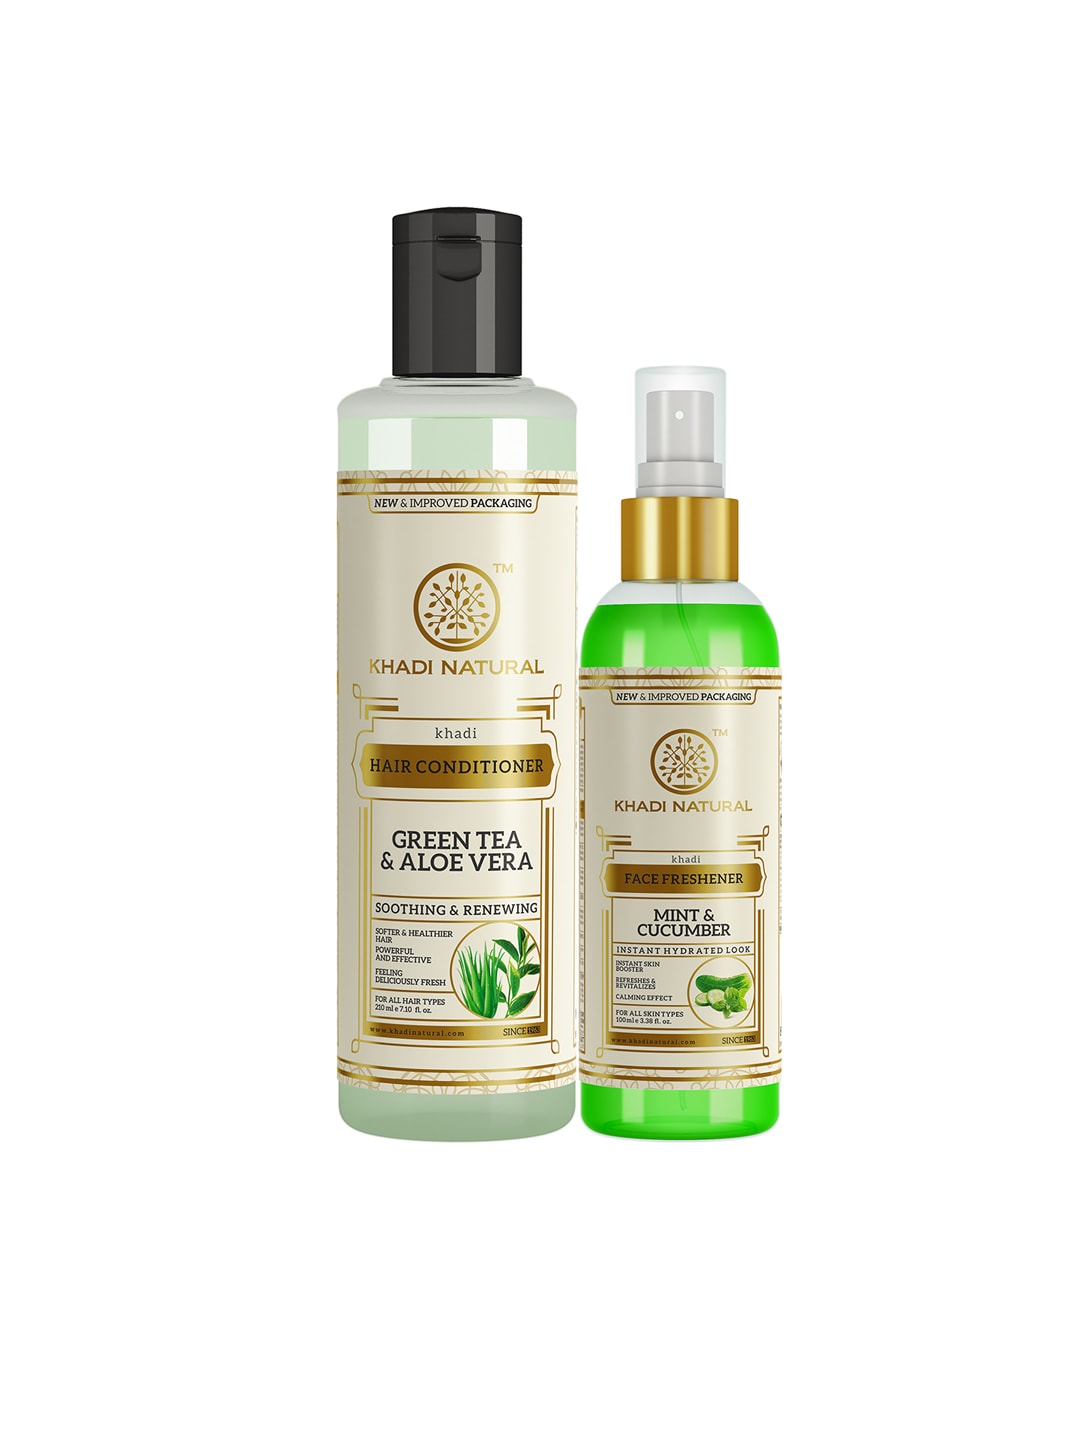 Khadi Natural Ayurvedic Mint and Cucumber Face Spray & Hair Conditioner Price in India